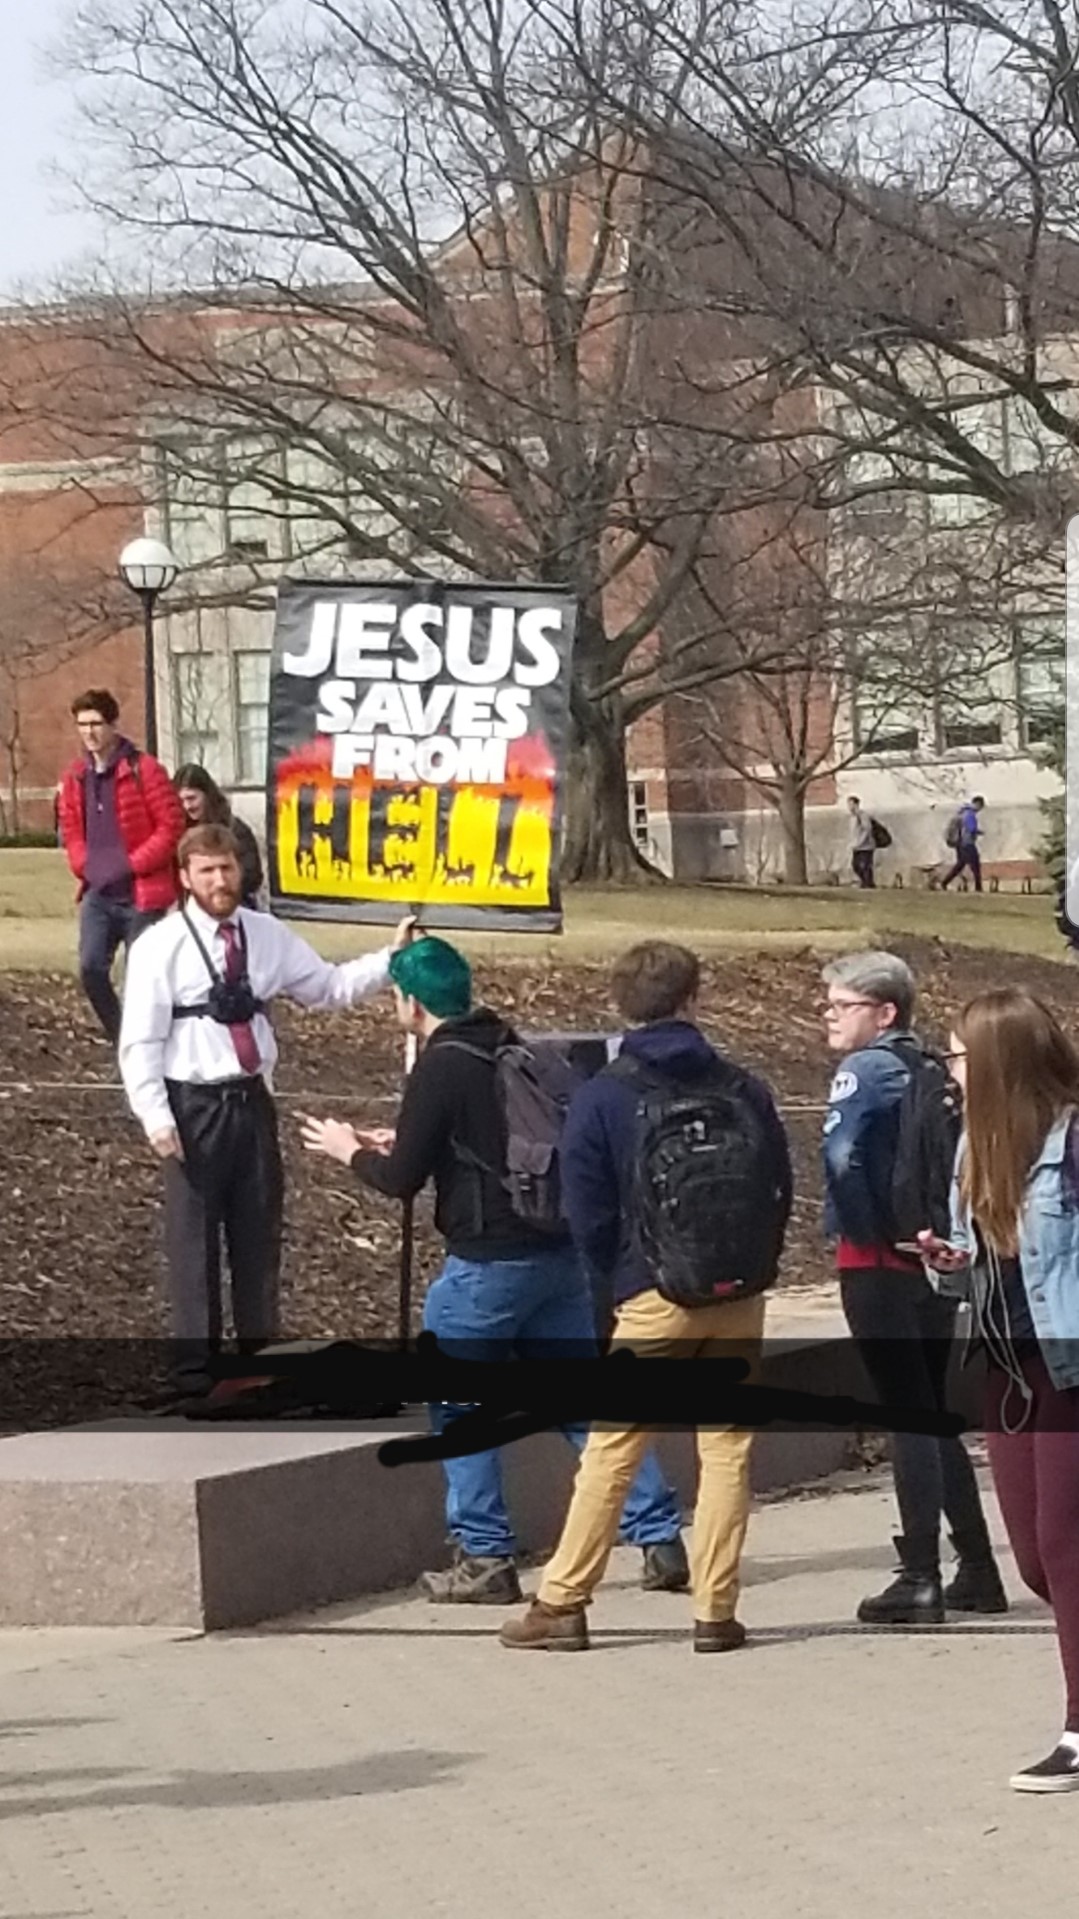 man holding sign in front of group that says "Jesus saves from Hell"